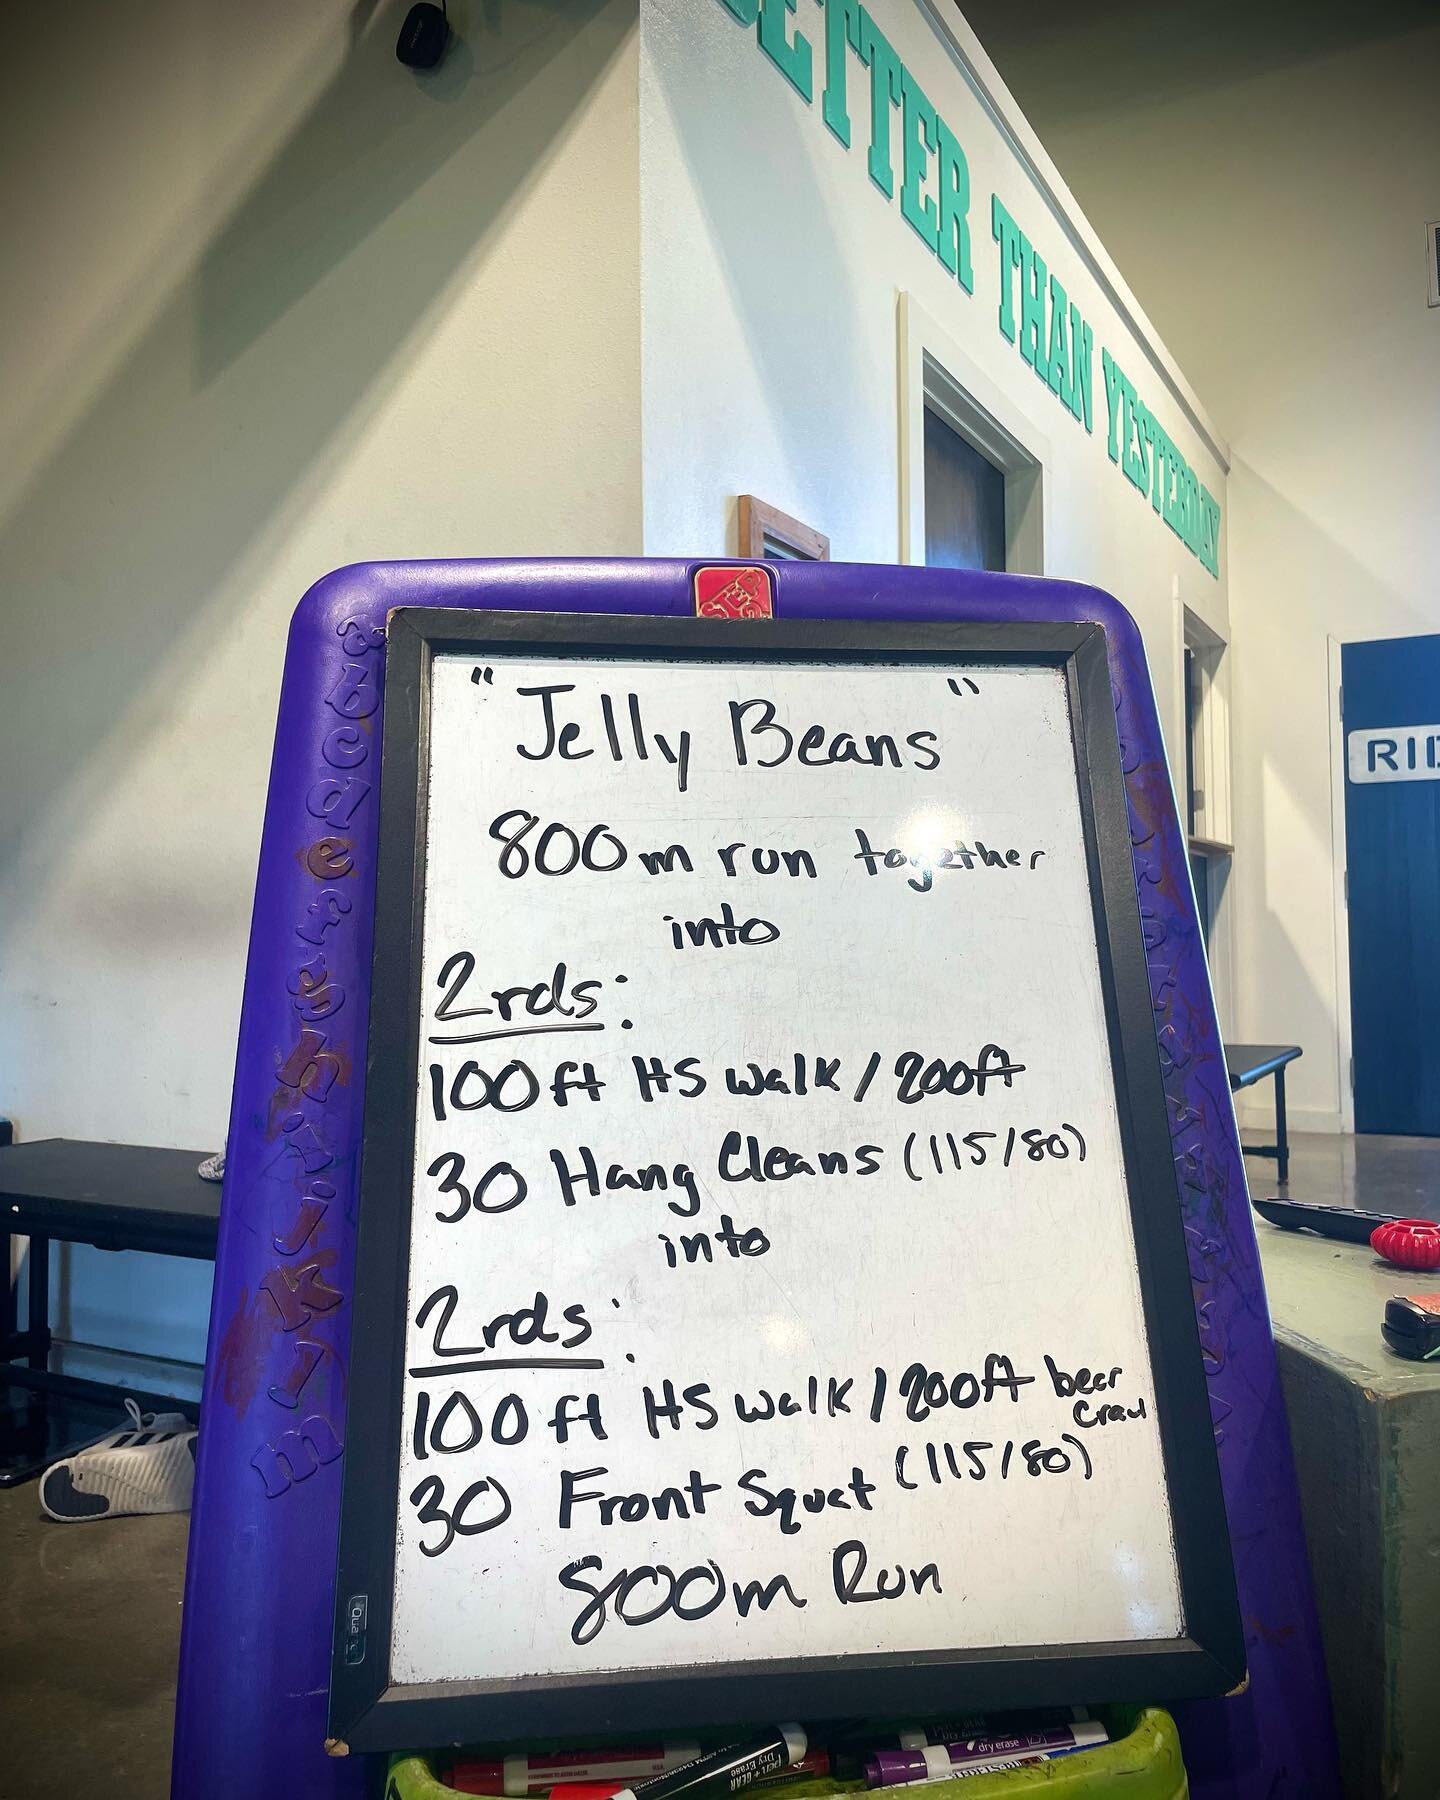 Blue skies and fitness for breakfast. You can&rsquo;t ask for better way to start off your weekend.

&ldquo;Jelly Beans&rdquo;

800m Run Together 

-into-
2 rounds:
100ft HS Walk/200ft Bear crawl
30 Hang Cleans (115/80#)

-into-
2 rounds:
100ft HS Wa